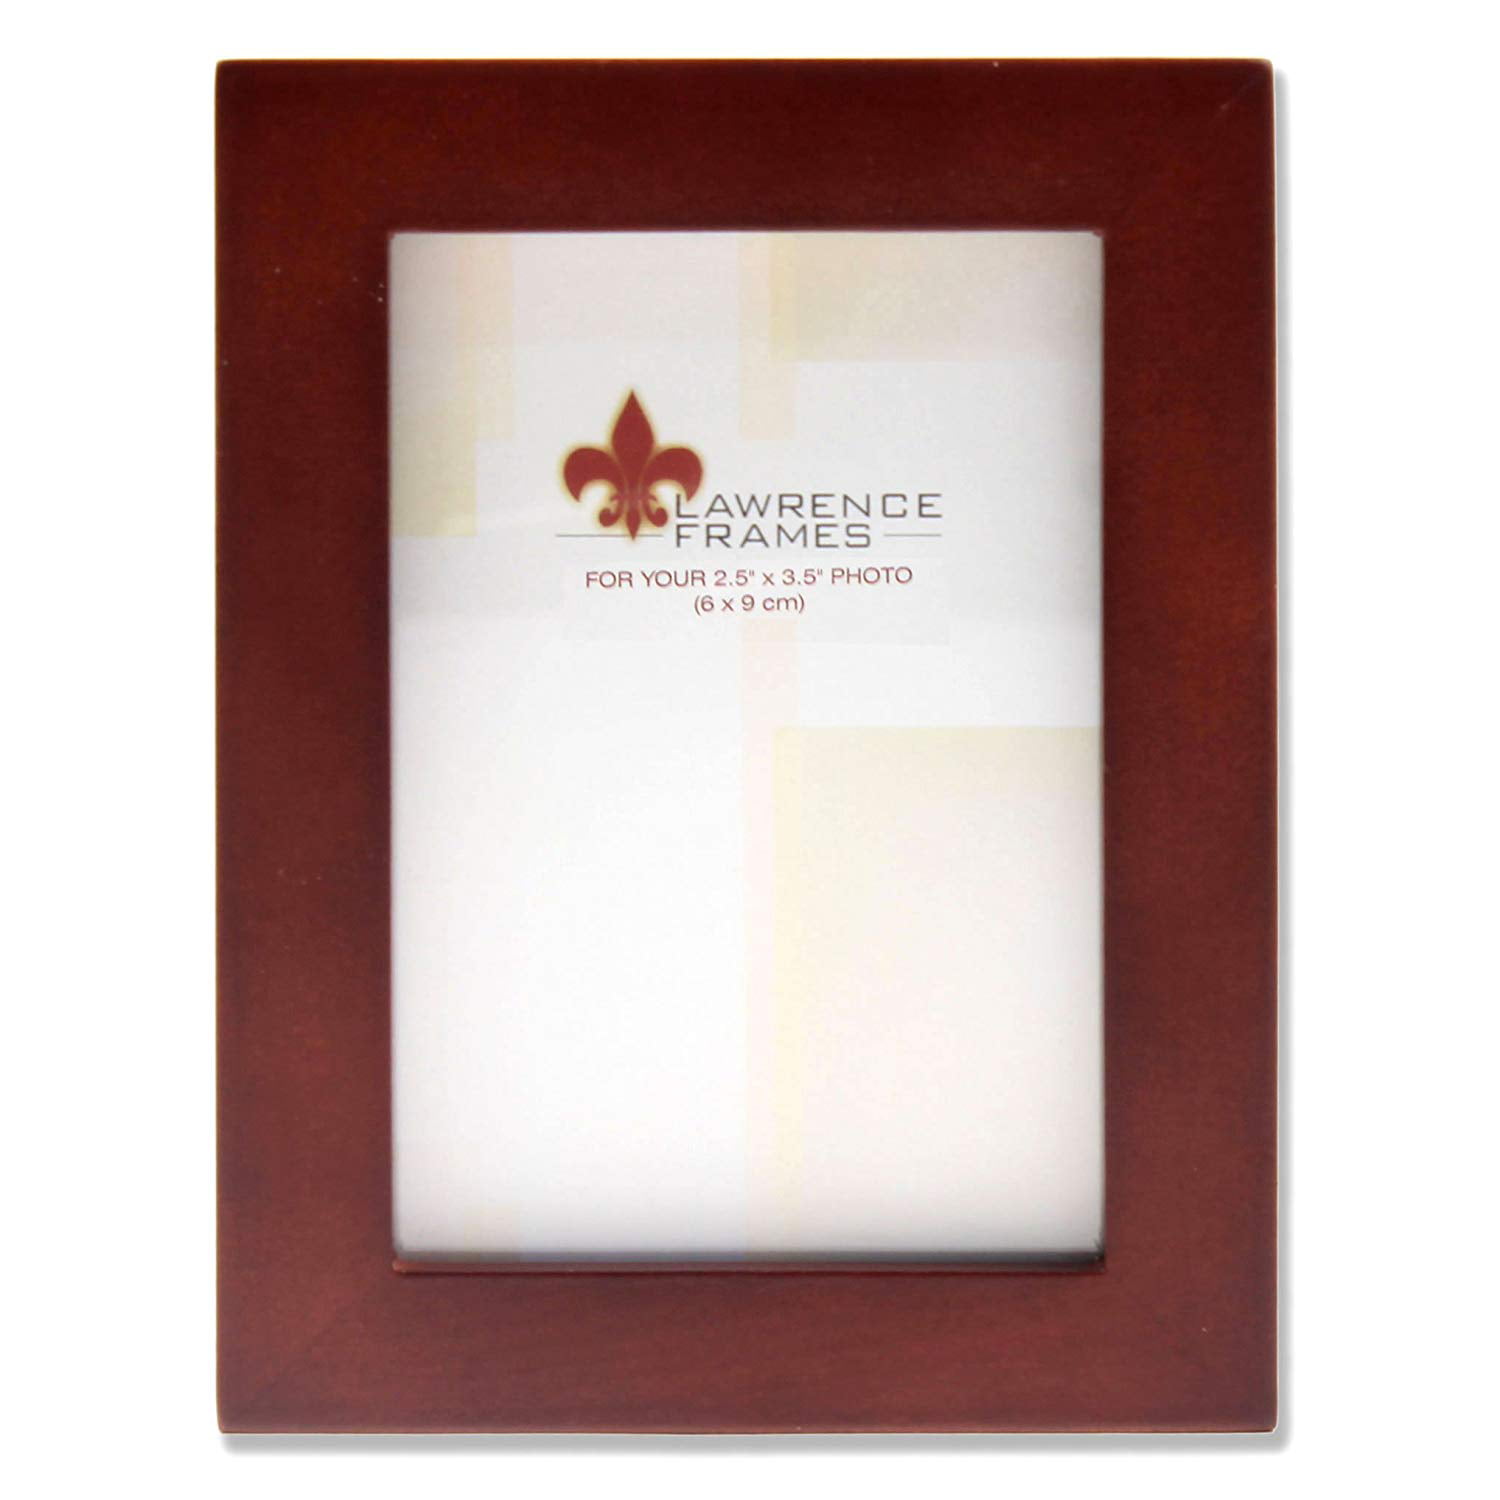 Gallery Collection Lawrence Frames Walnut Wood Picture Frame 2 by 3-Inch 